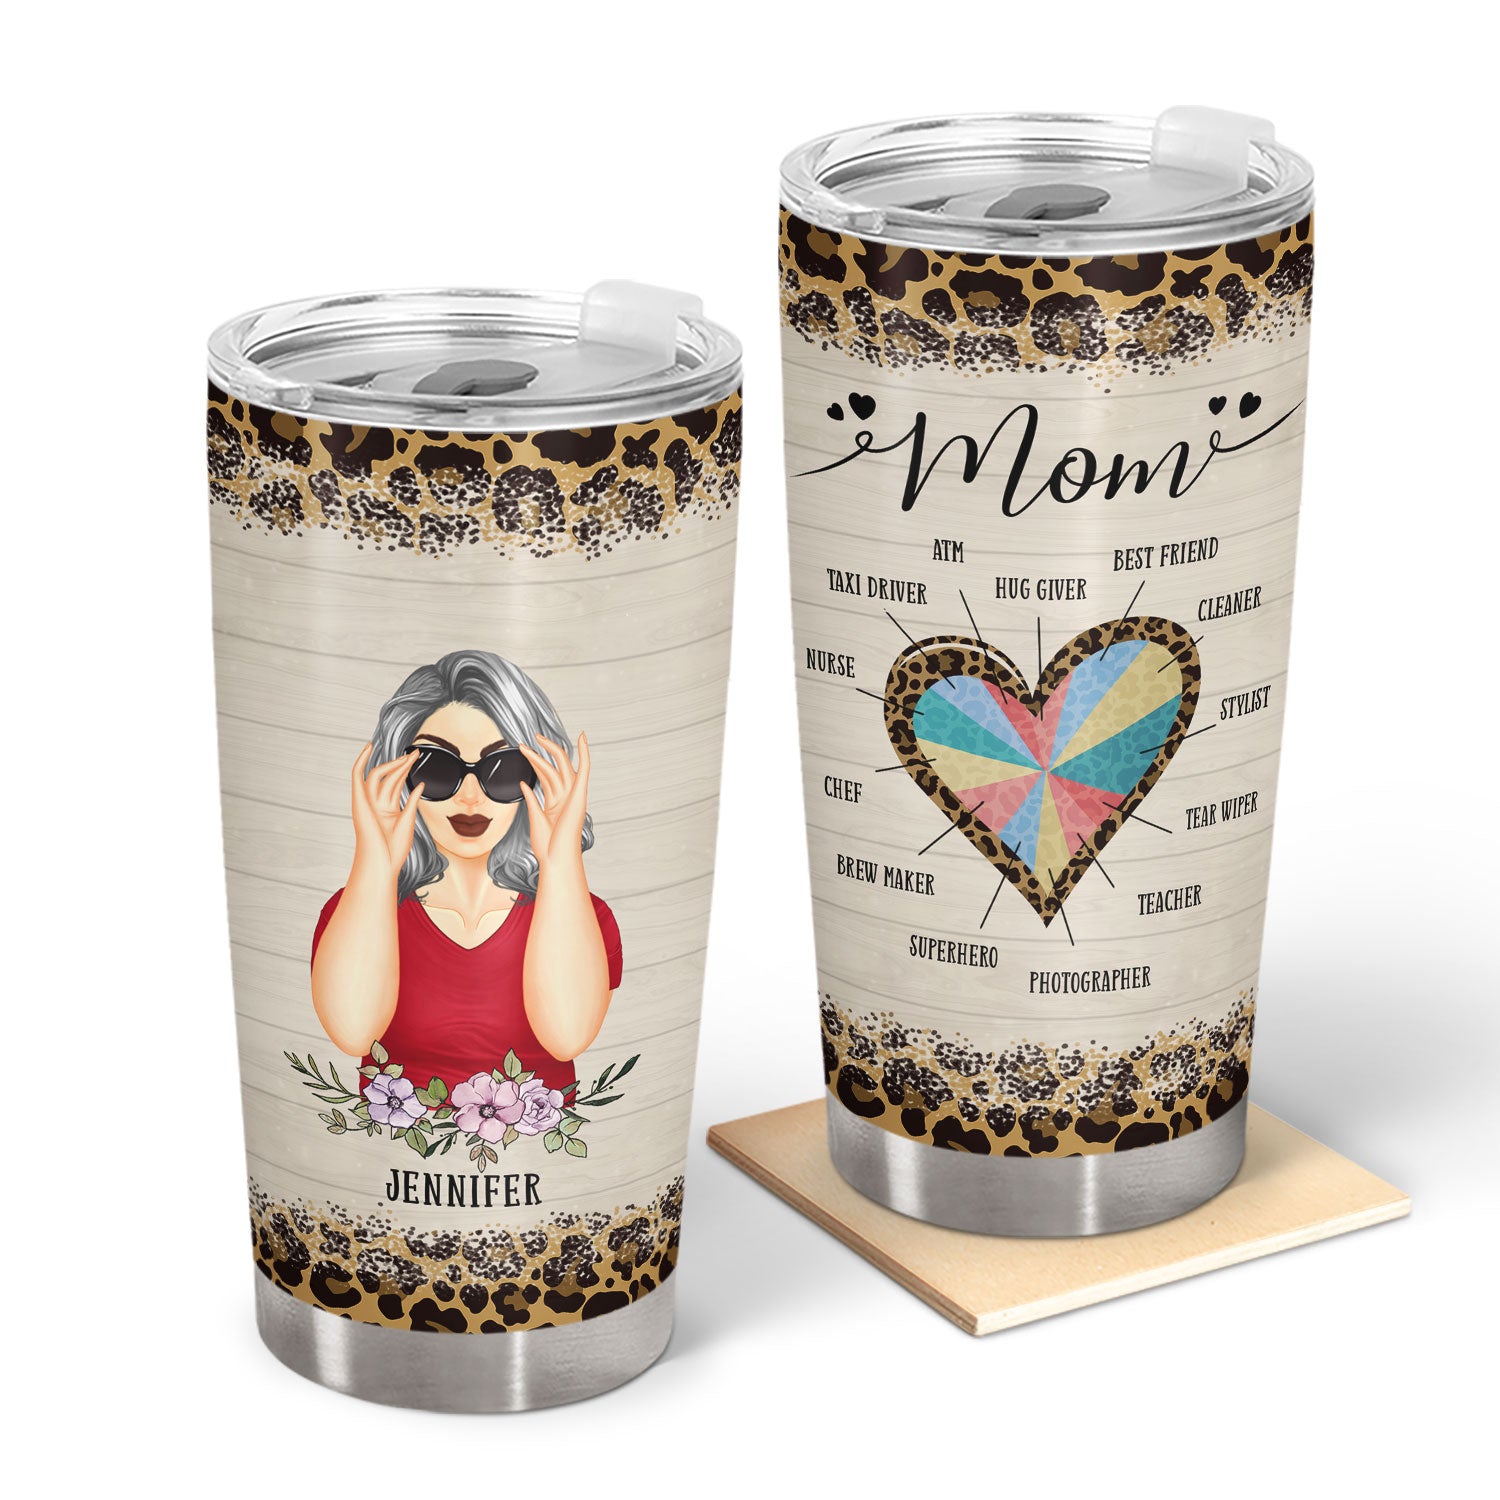 Best Friend Hug Giver - Gift For Mom, Mother - Personalized Custom Tumbler